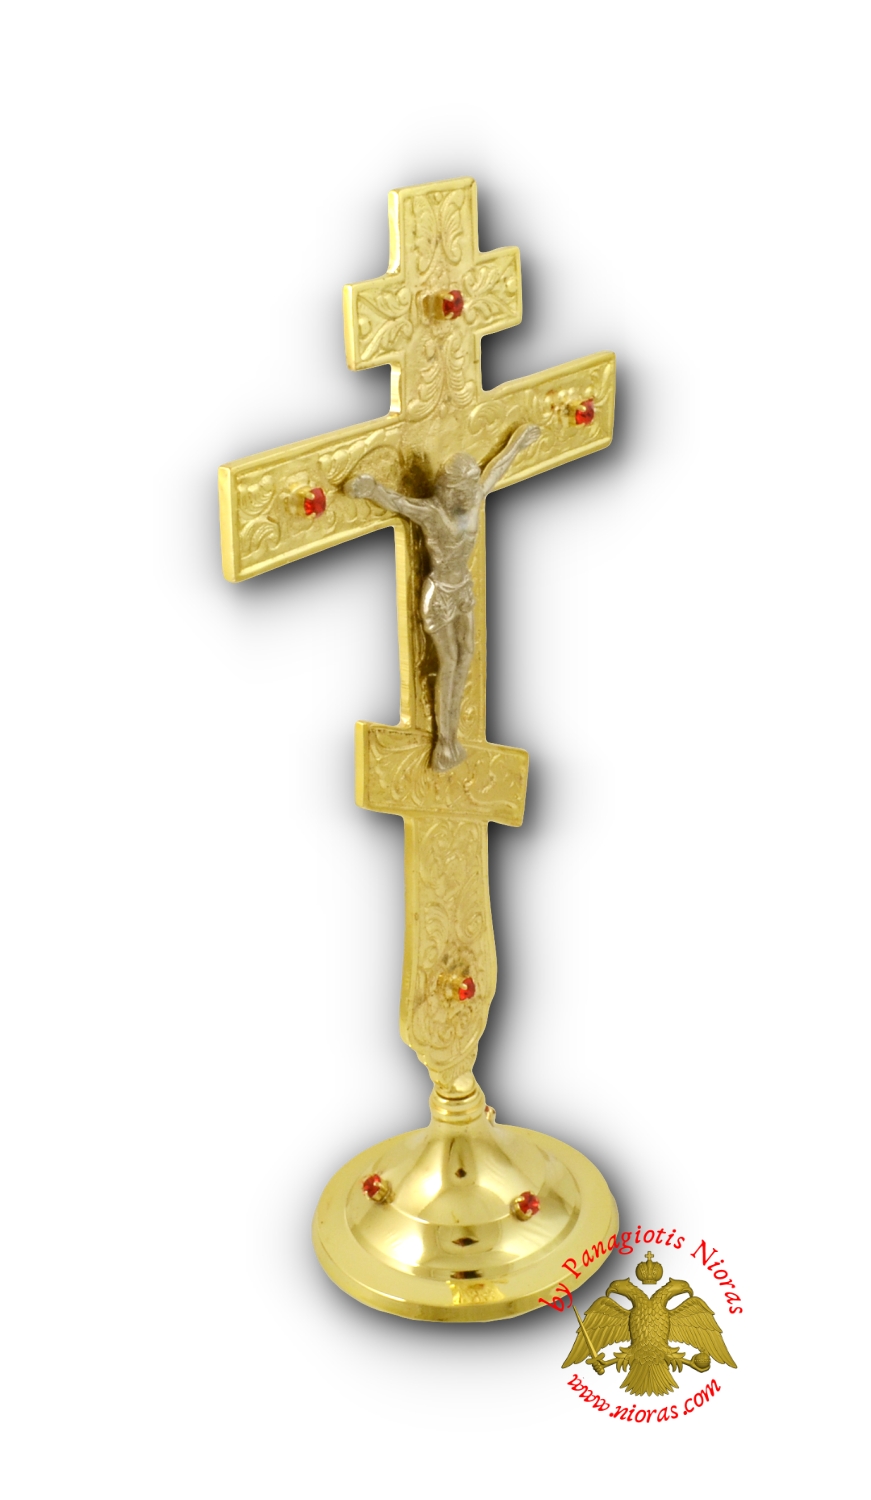 Russian Blessing Metal Cross Gold Plated Finishing 15x26cm with Standing Base